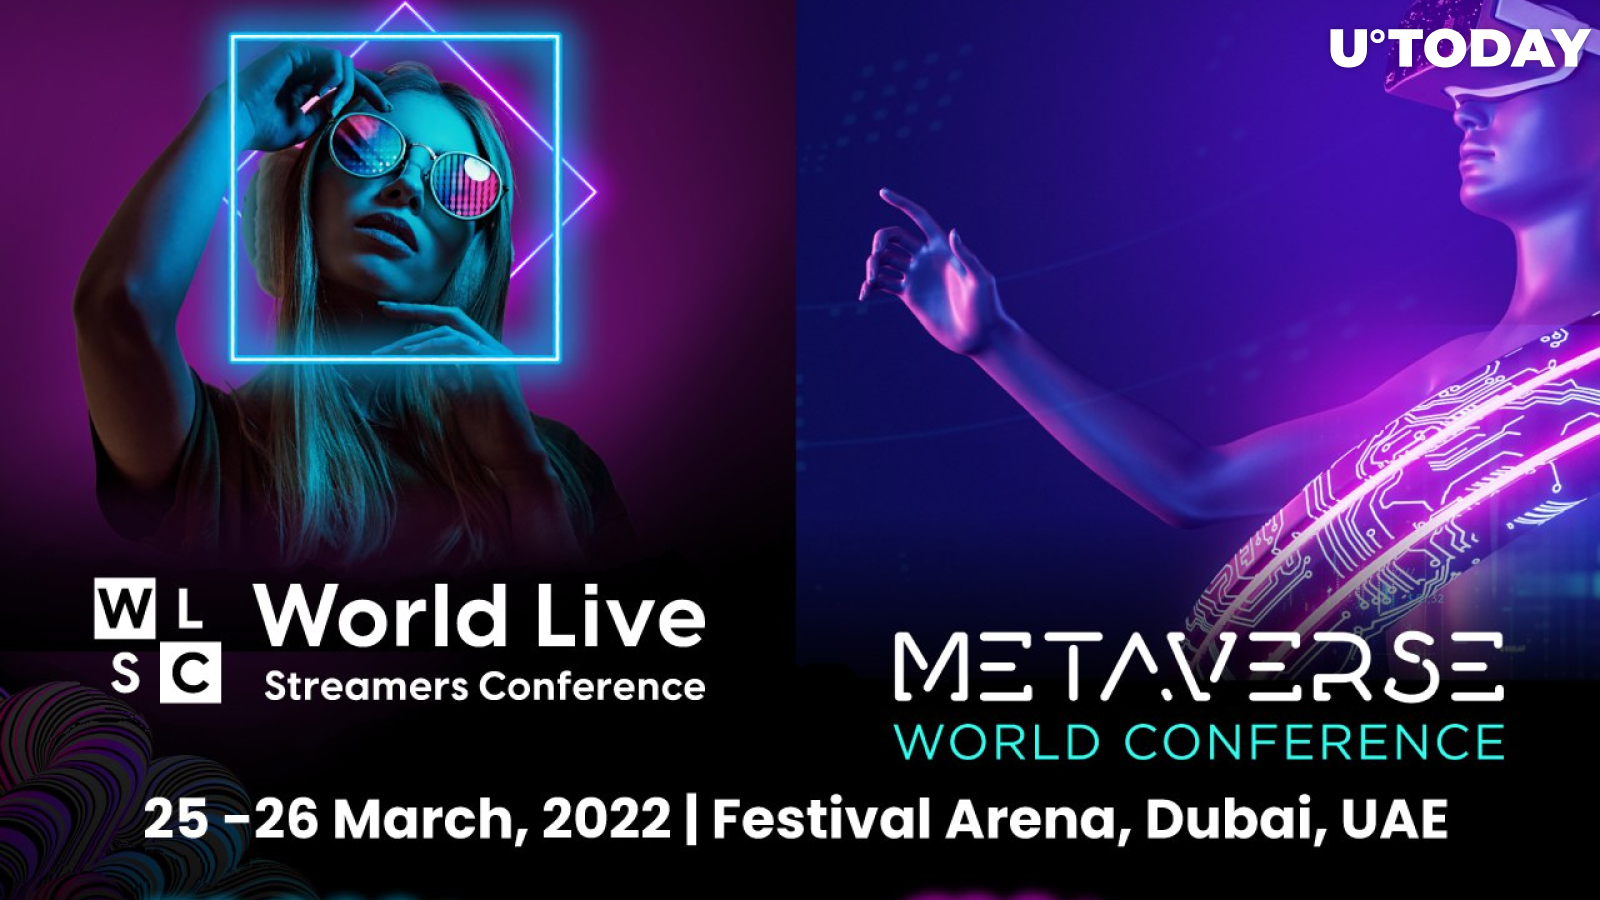 Catch Two of the Biggest Live Streaming and Metaverse Events of the Year on Mar 25-26